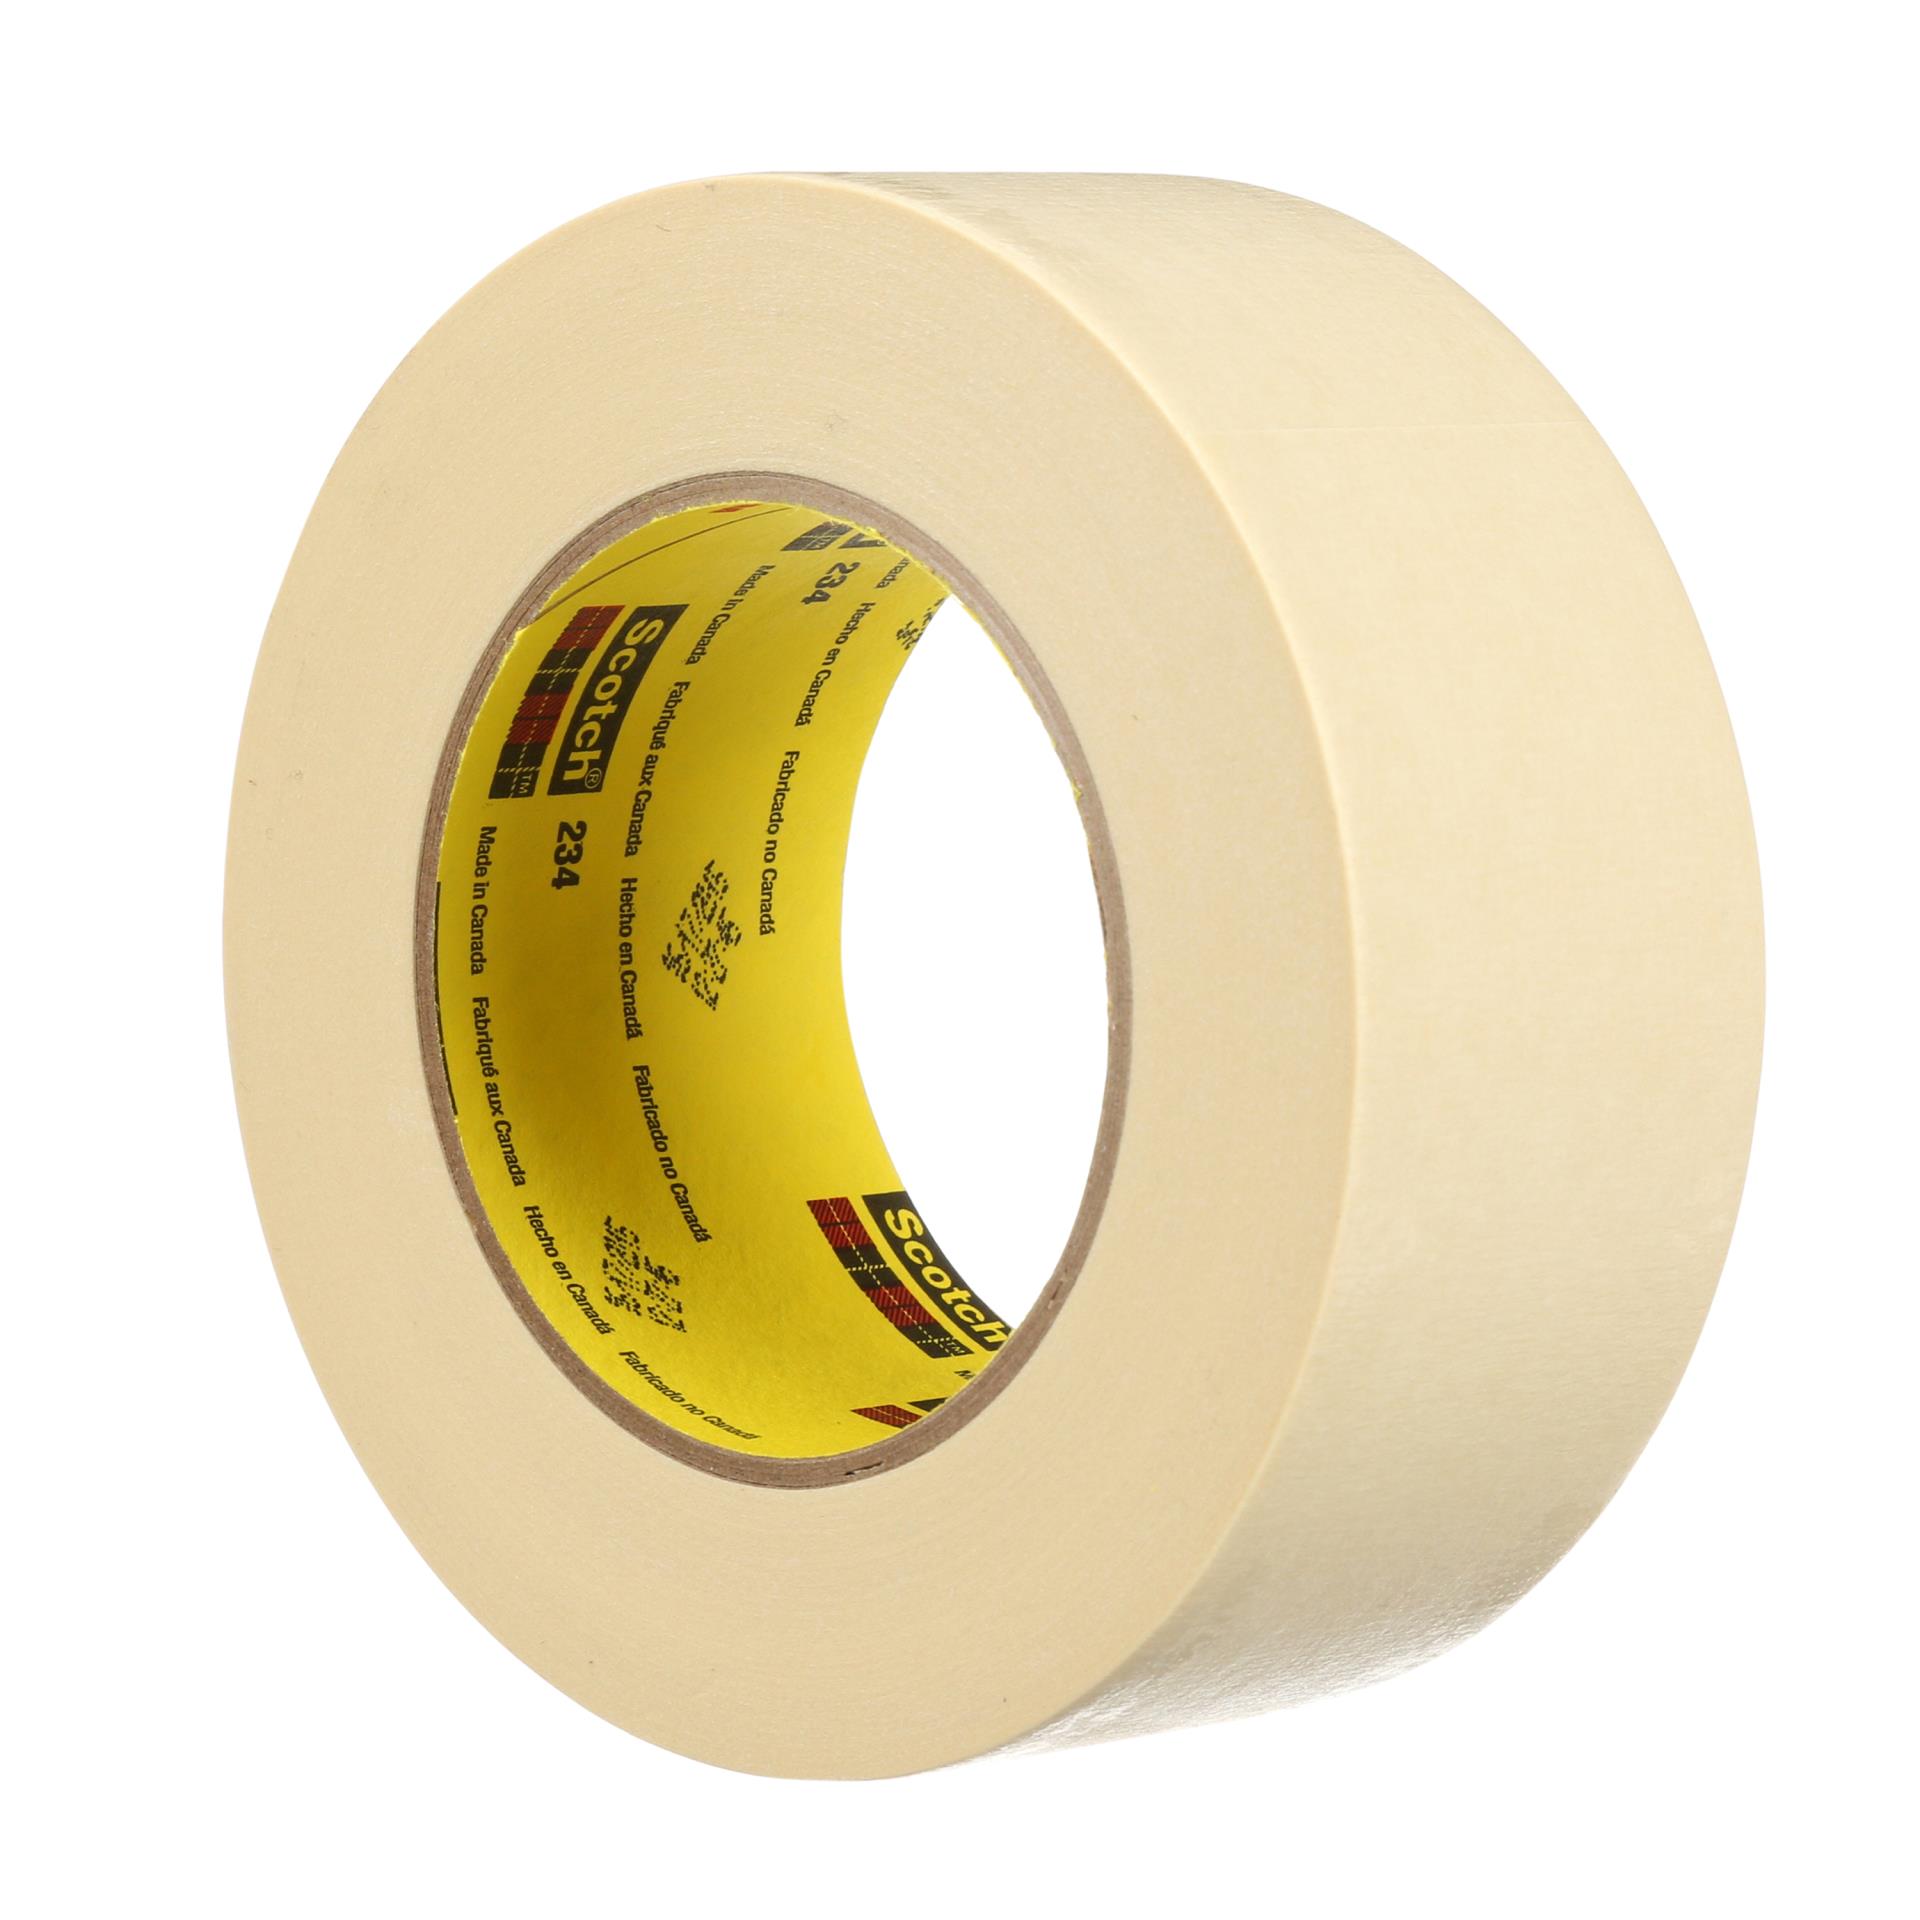 Electrically Conductive Tape 9772 Series - 3M